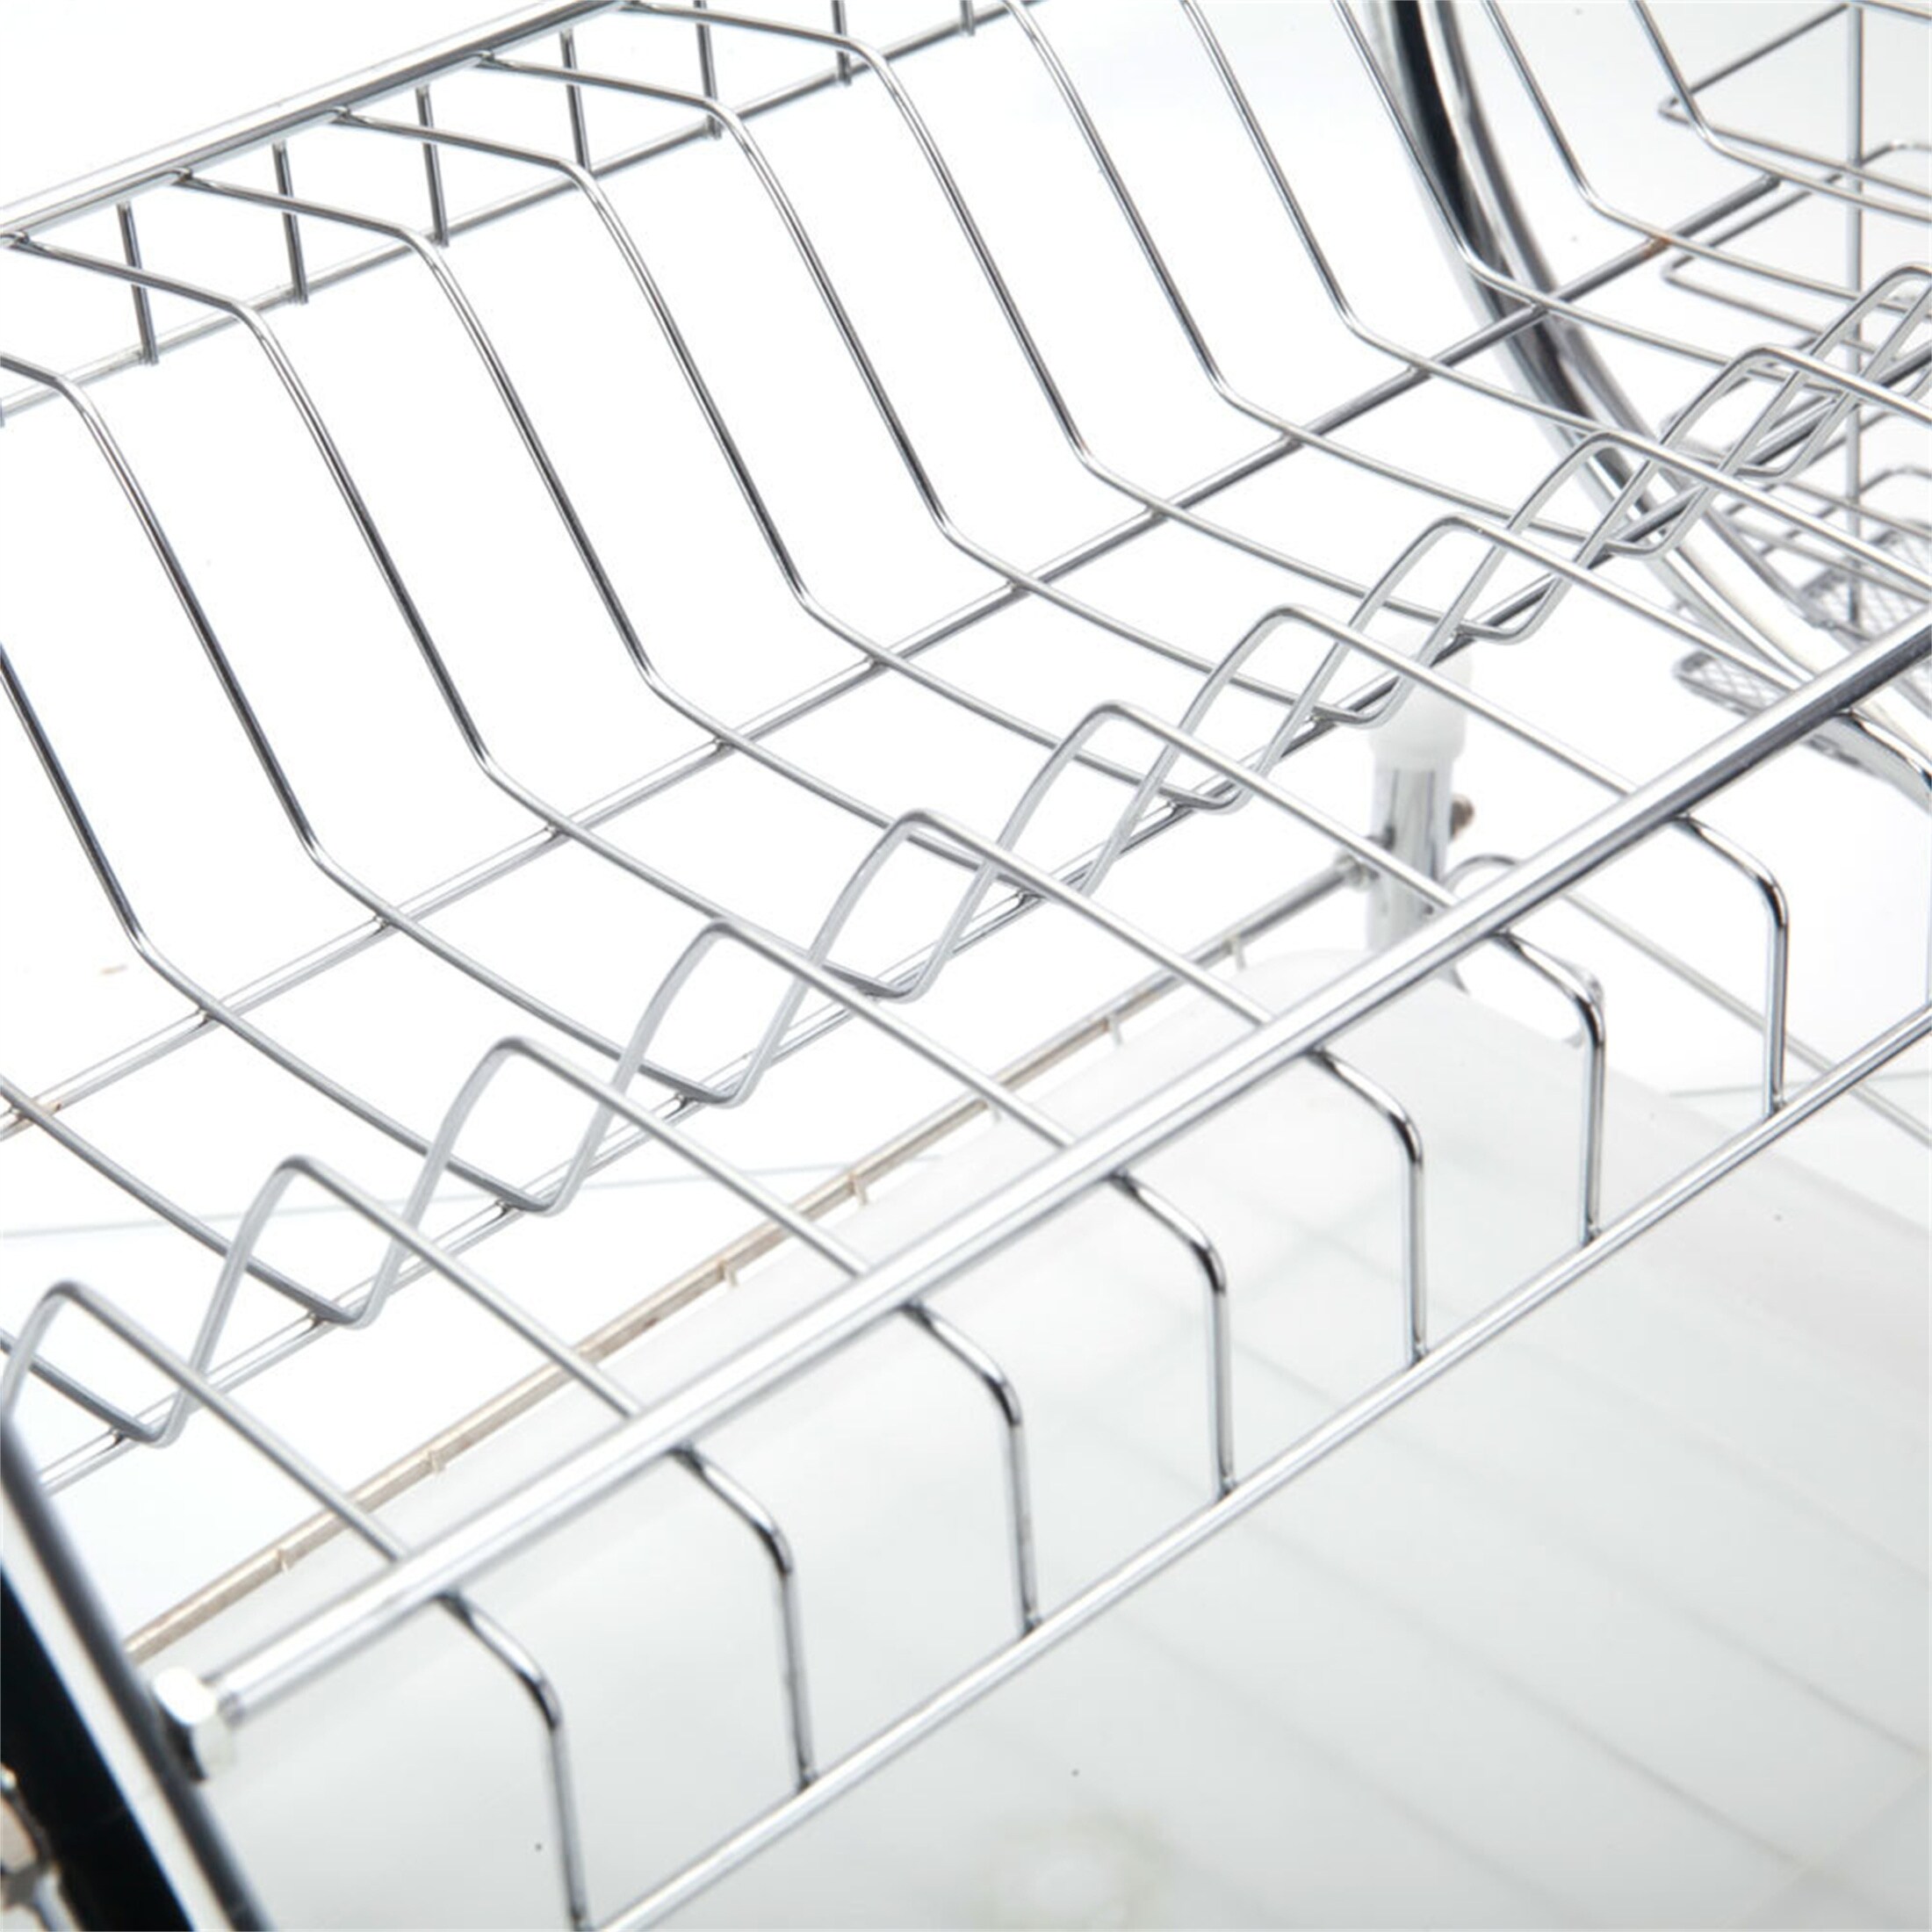 https://ak1.ostkcdn.com/images/products/is/images/direct/60b05413989de3d83ed2f54ddeccf1e1cb29e3c8/2-Tier-Dish-Drying-Rack-Drainer-Stainless-Steel-Kitchen-Cutlery-Holder.jpg